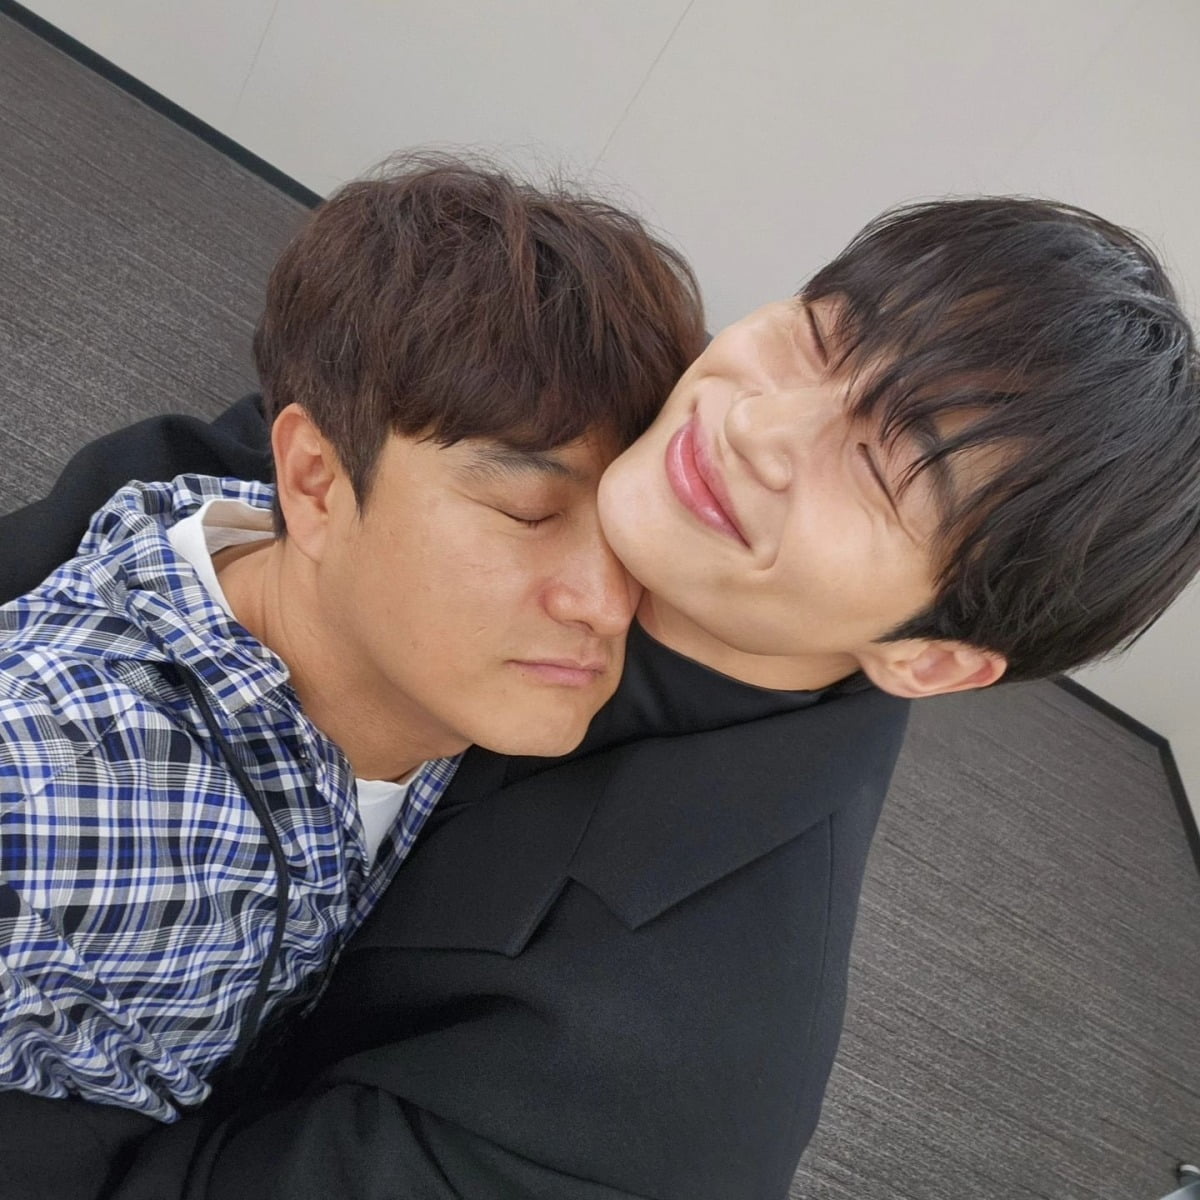 Byun Woo-seok ♥ Director Yoon Jong-ho reveals two shots of them embracing each other